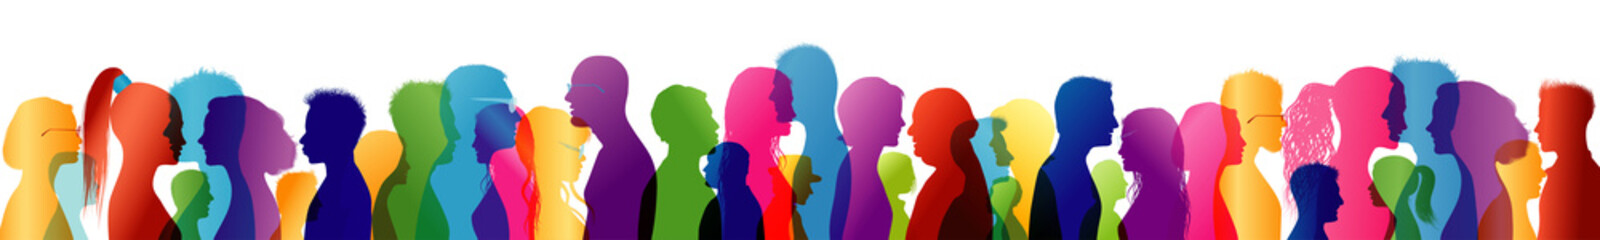 Crowd talking. Group of people talking. Speak. To communicate. Colored silhouette profiles